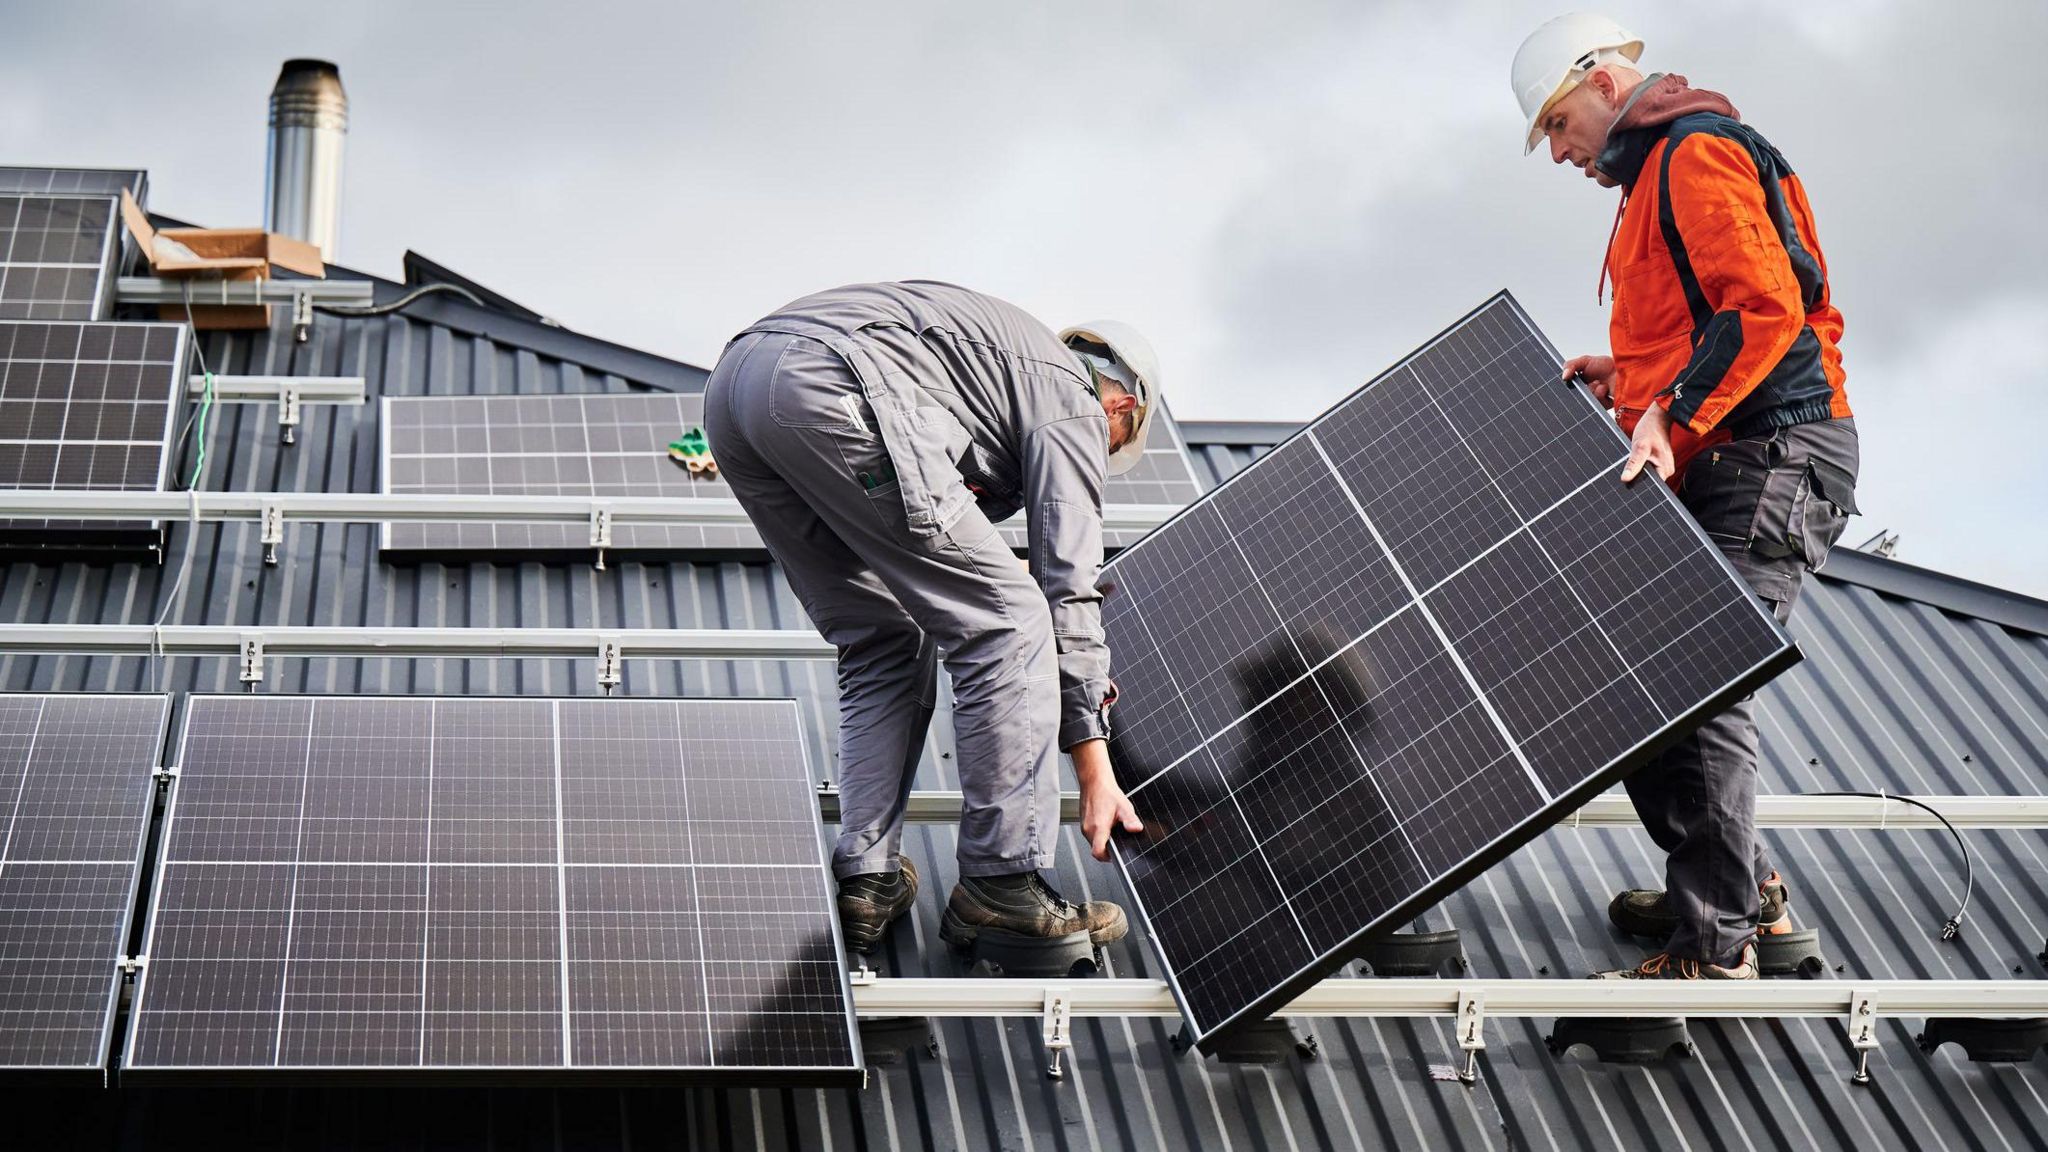 Two men work to attach solar panels to a roof